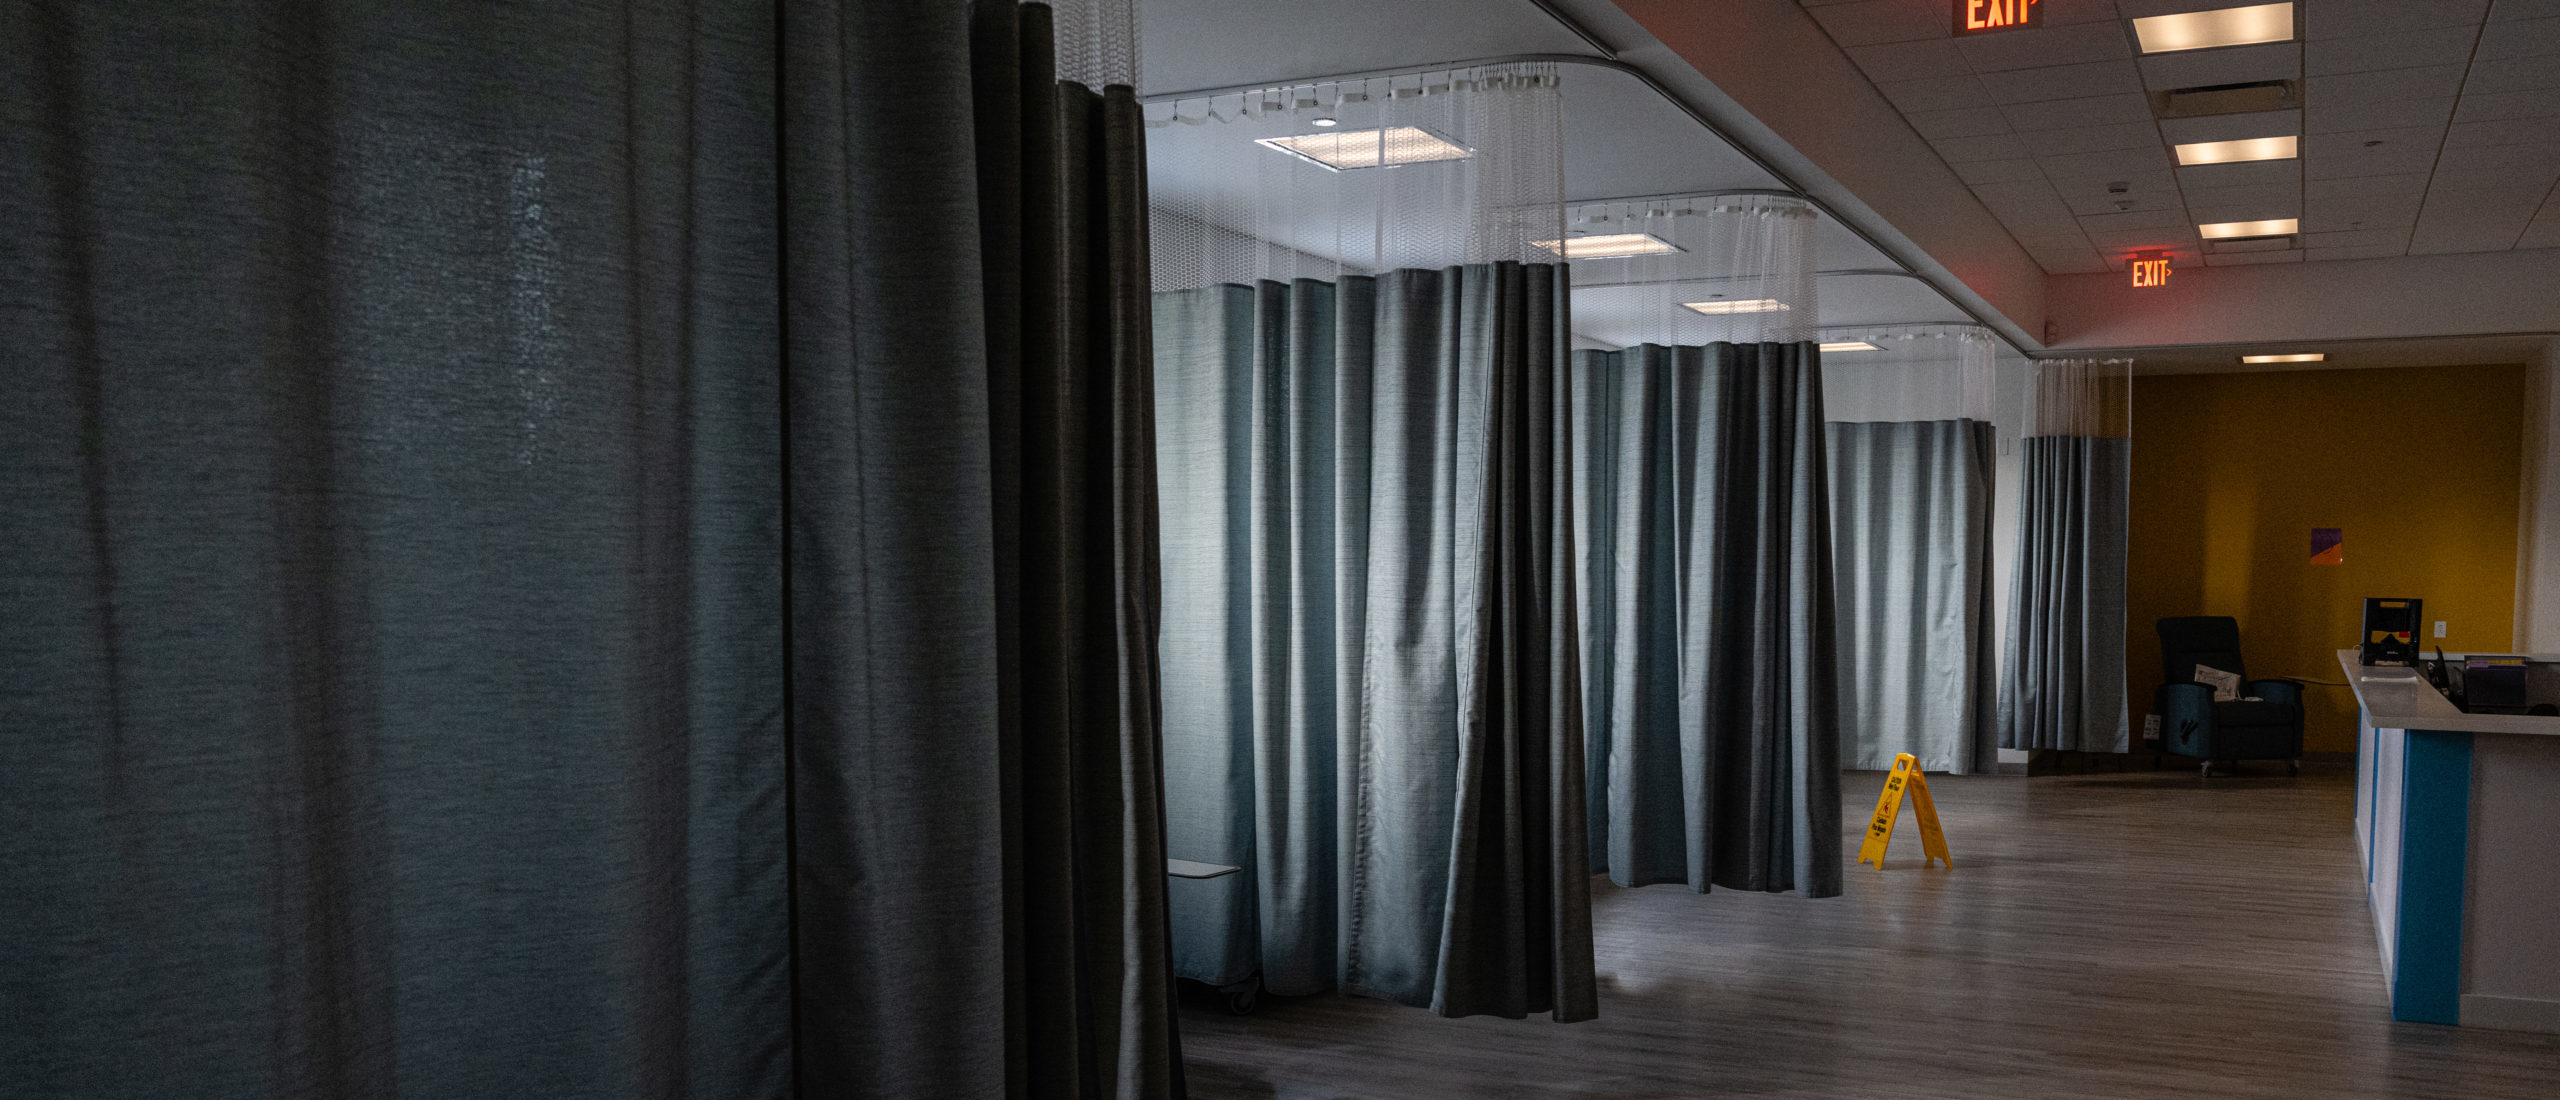 Curtains separating sections of the recovery room are seen at Planned Parenthood Health Center on July 9, 2022 in Louisville, Kentucky.